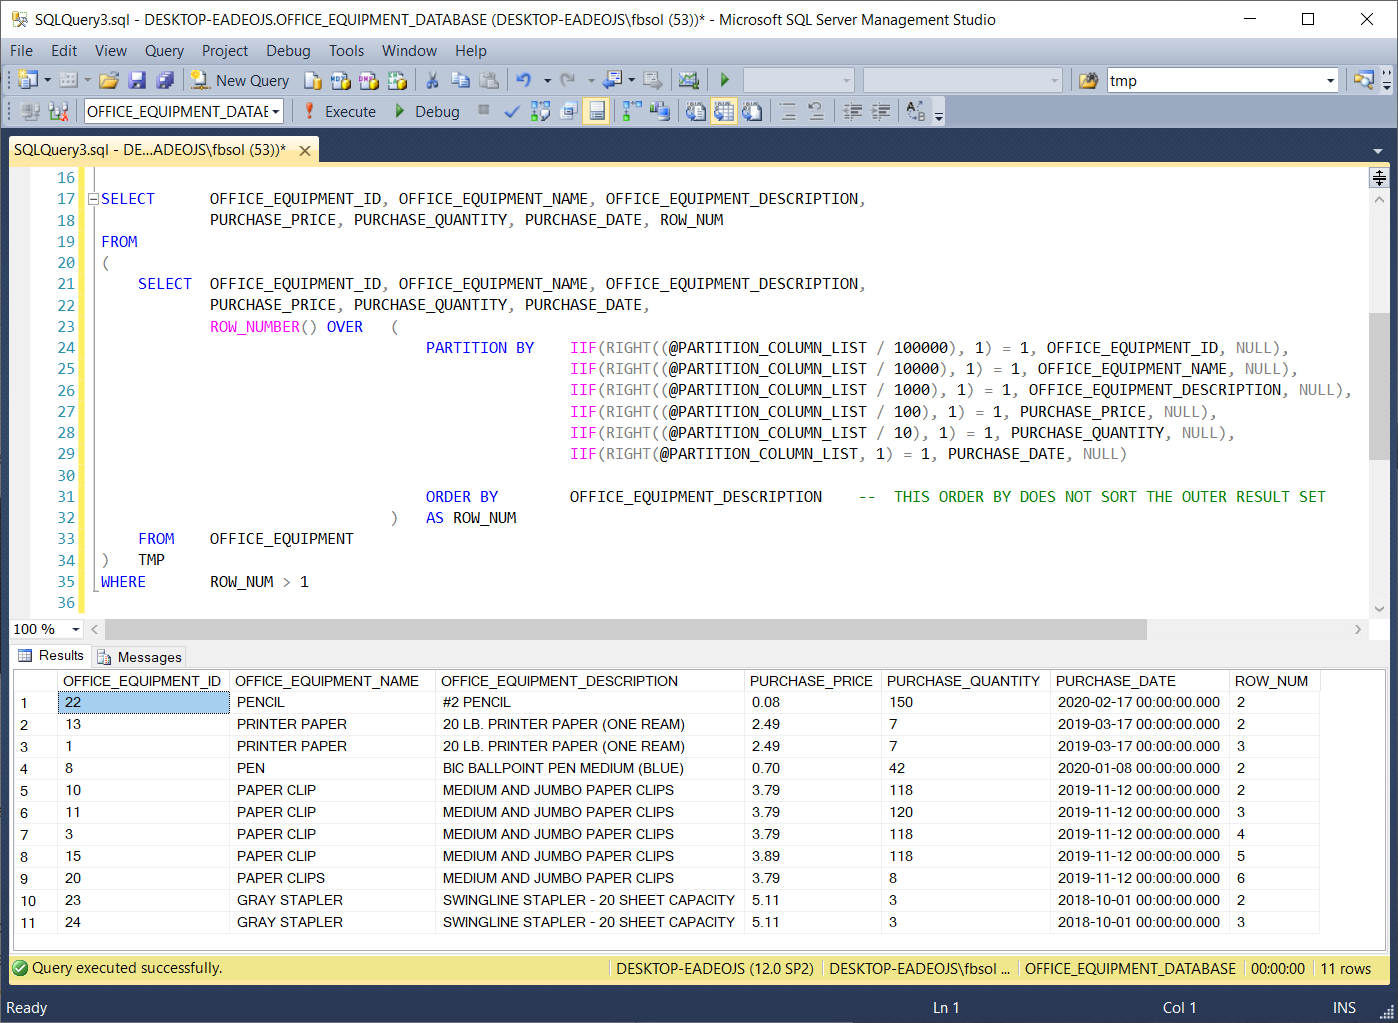 Run the DYNAMIC_ROW_NUMBER_PARTITIONS stored procedure with a T-SQL EXEC statement, and see the result set.